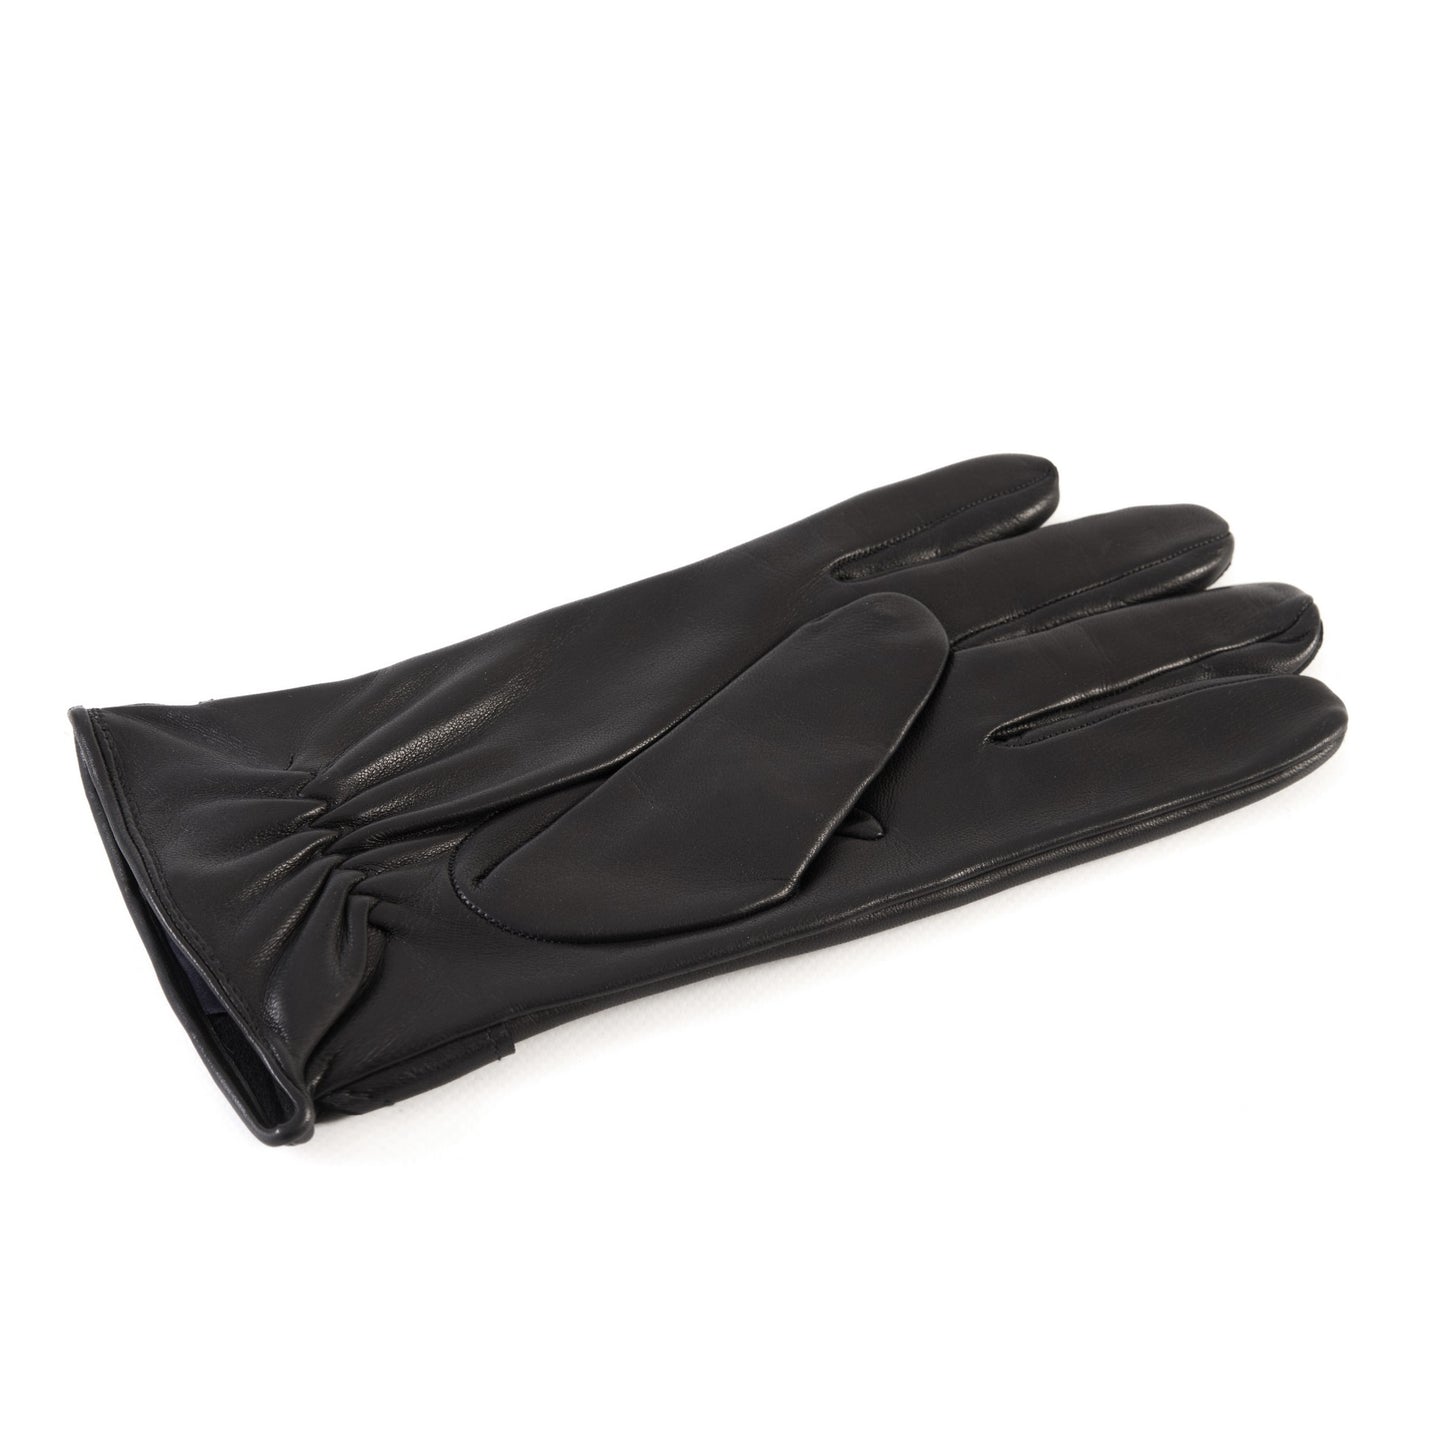 Men's black nappa and printed suede leather gloves with buttons and elastic on palm